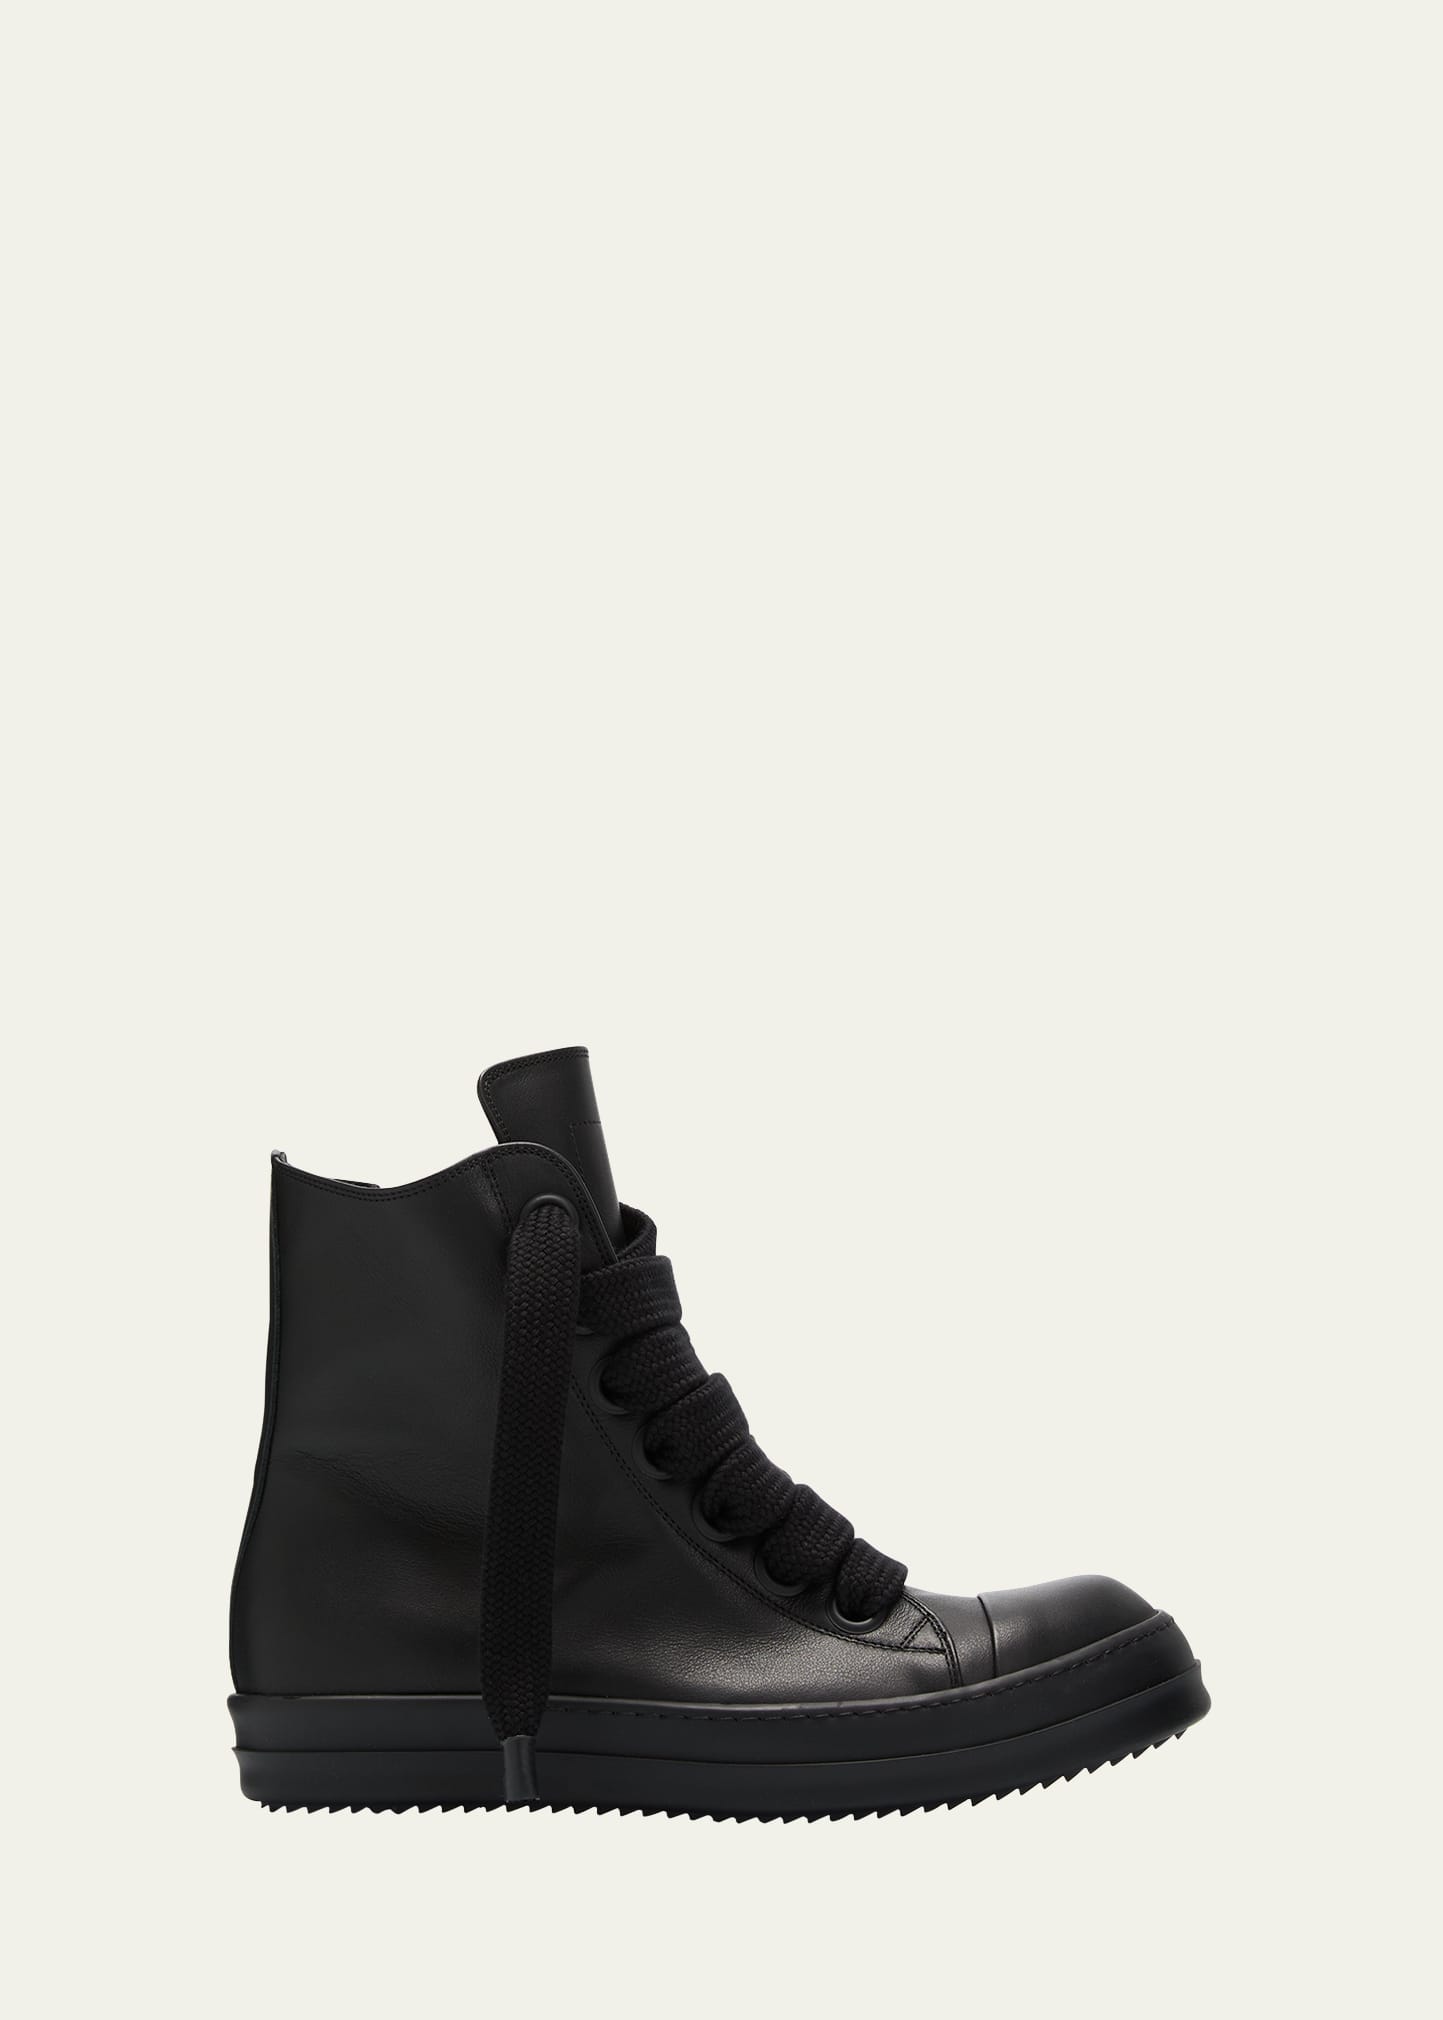 RICK OWENS MEN'S JUMBO LACED LEATHER HIGH-TOP SNEAKERS